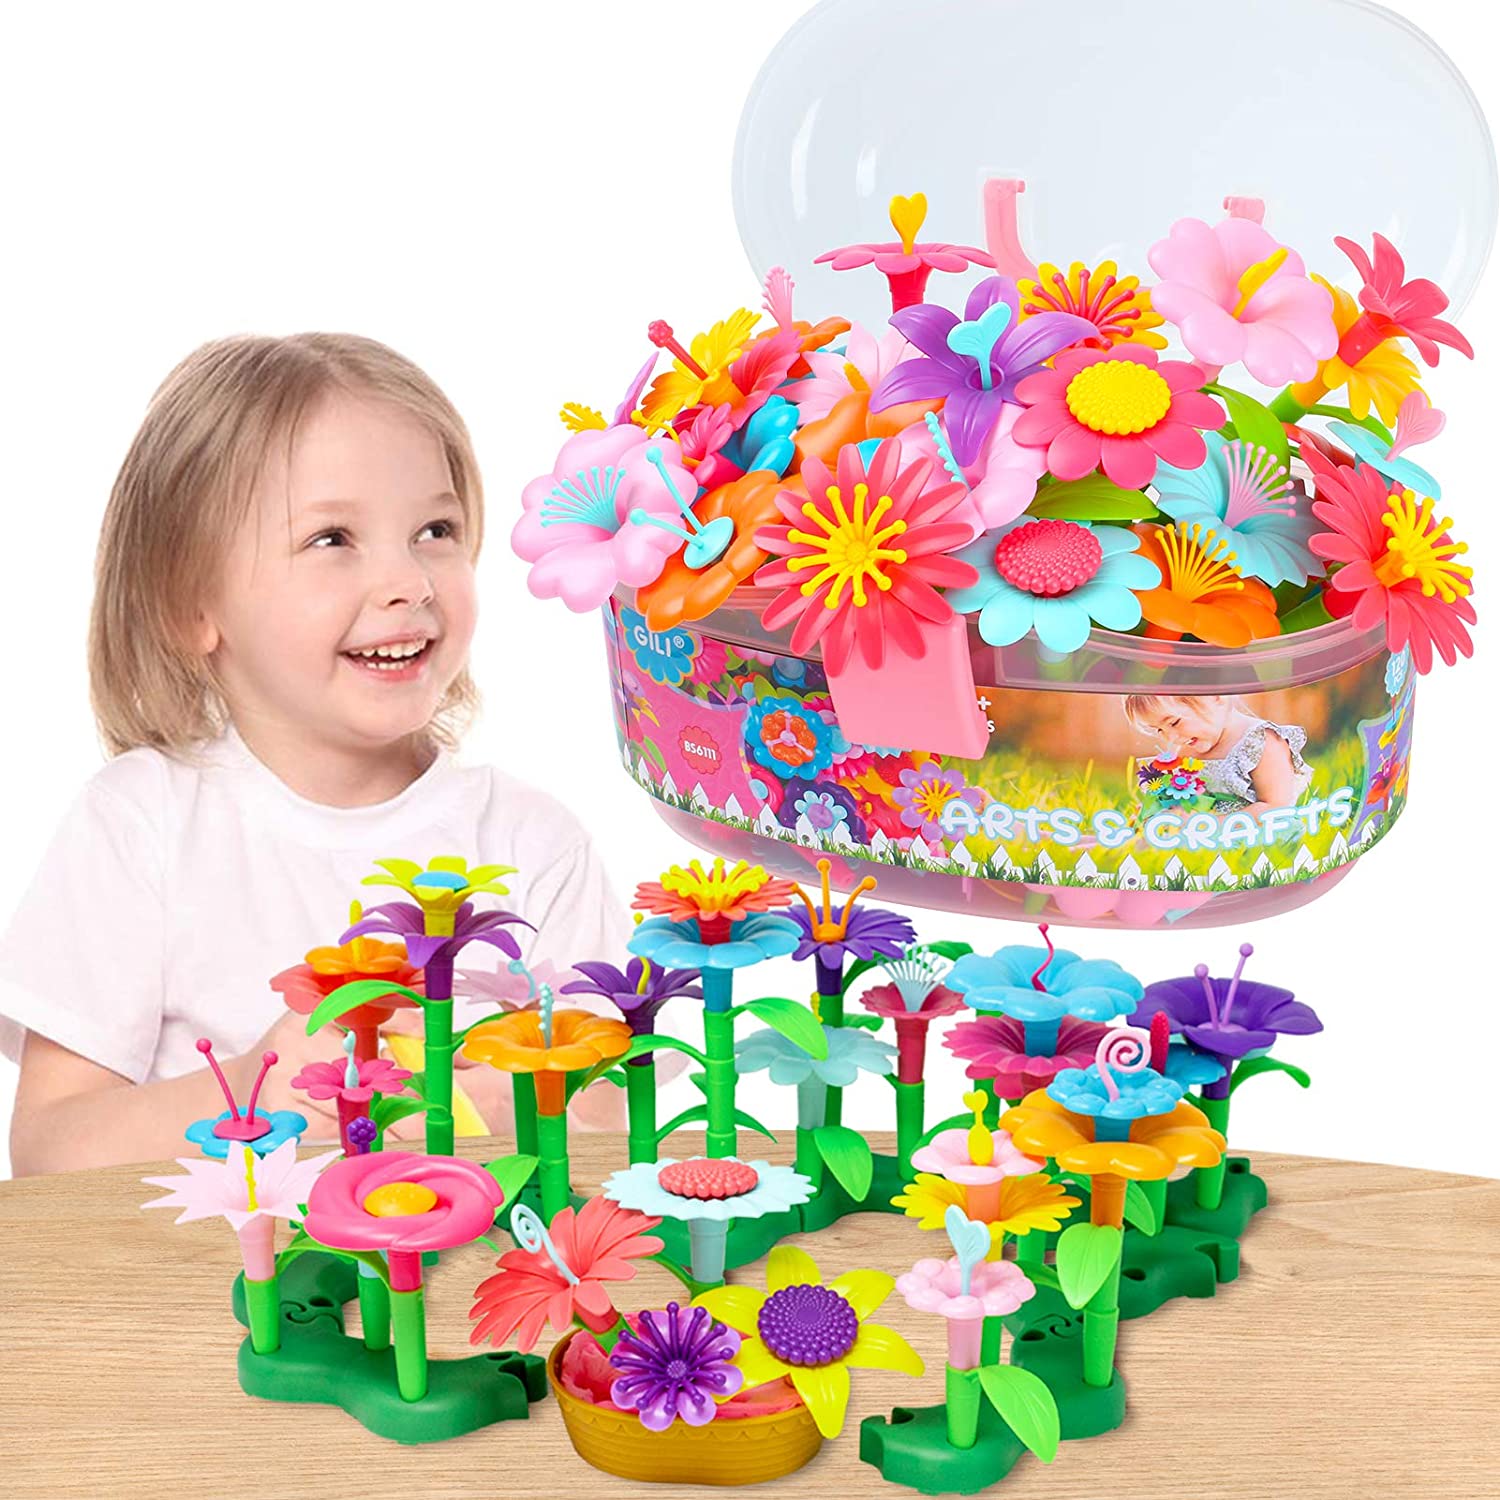 GILI BPA-Free Flower Building Gift For 4-Year-Old Girls